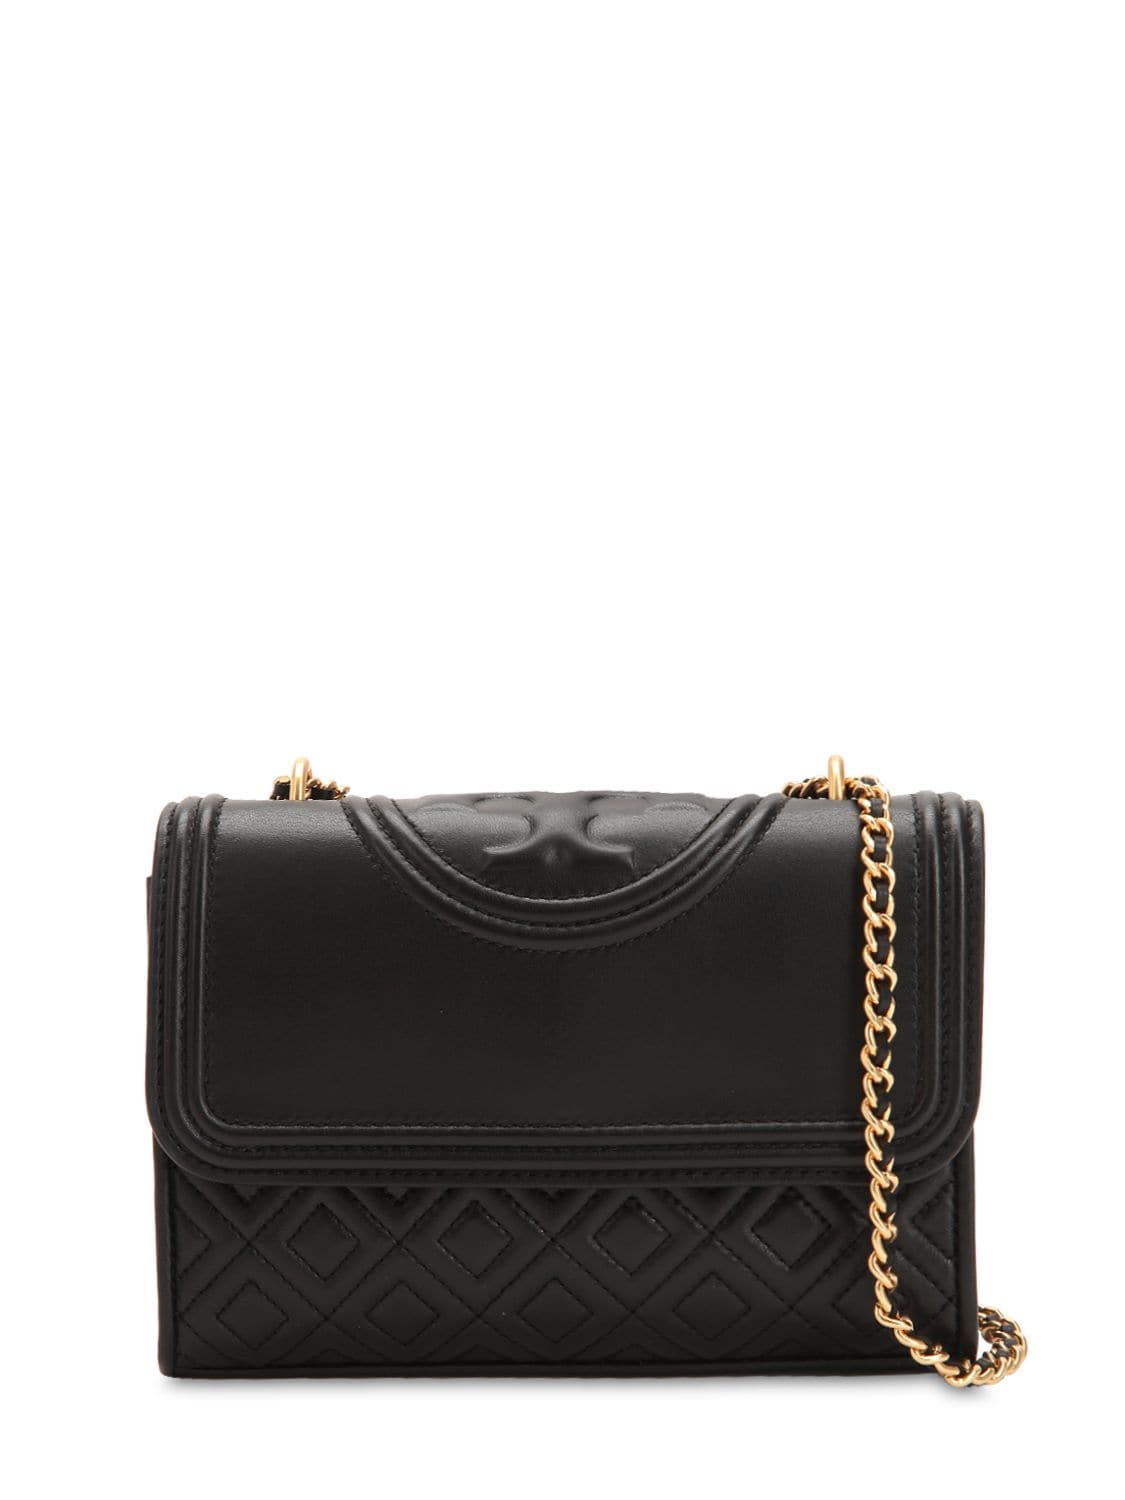 Tory Burch Small Fleming Leather Shoulder Bag In Black